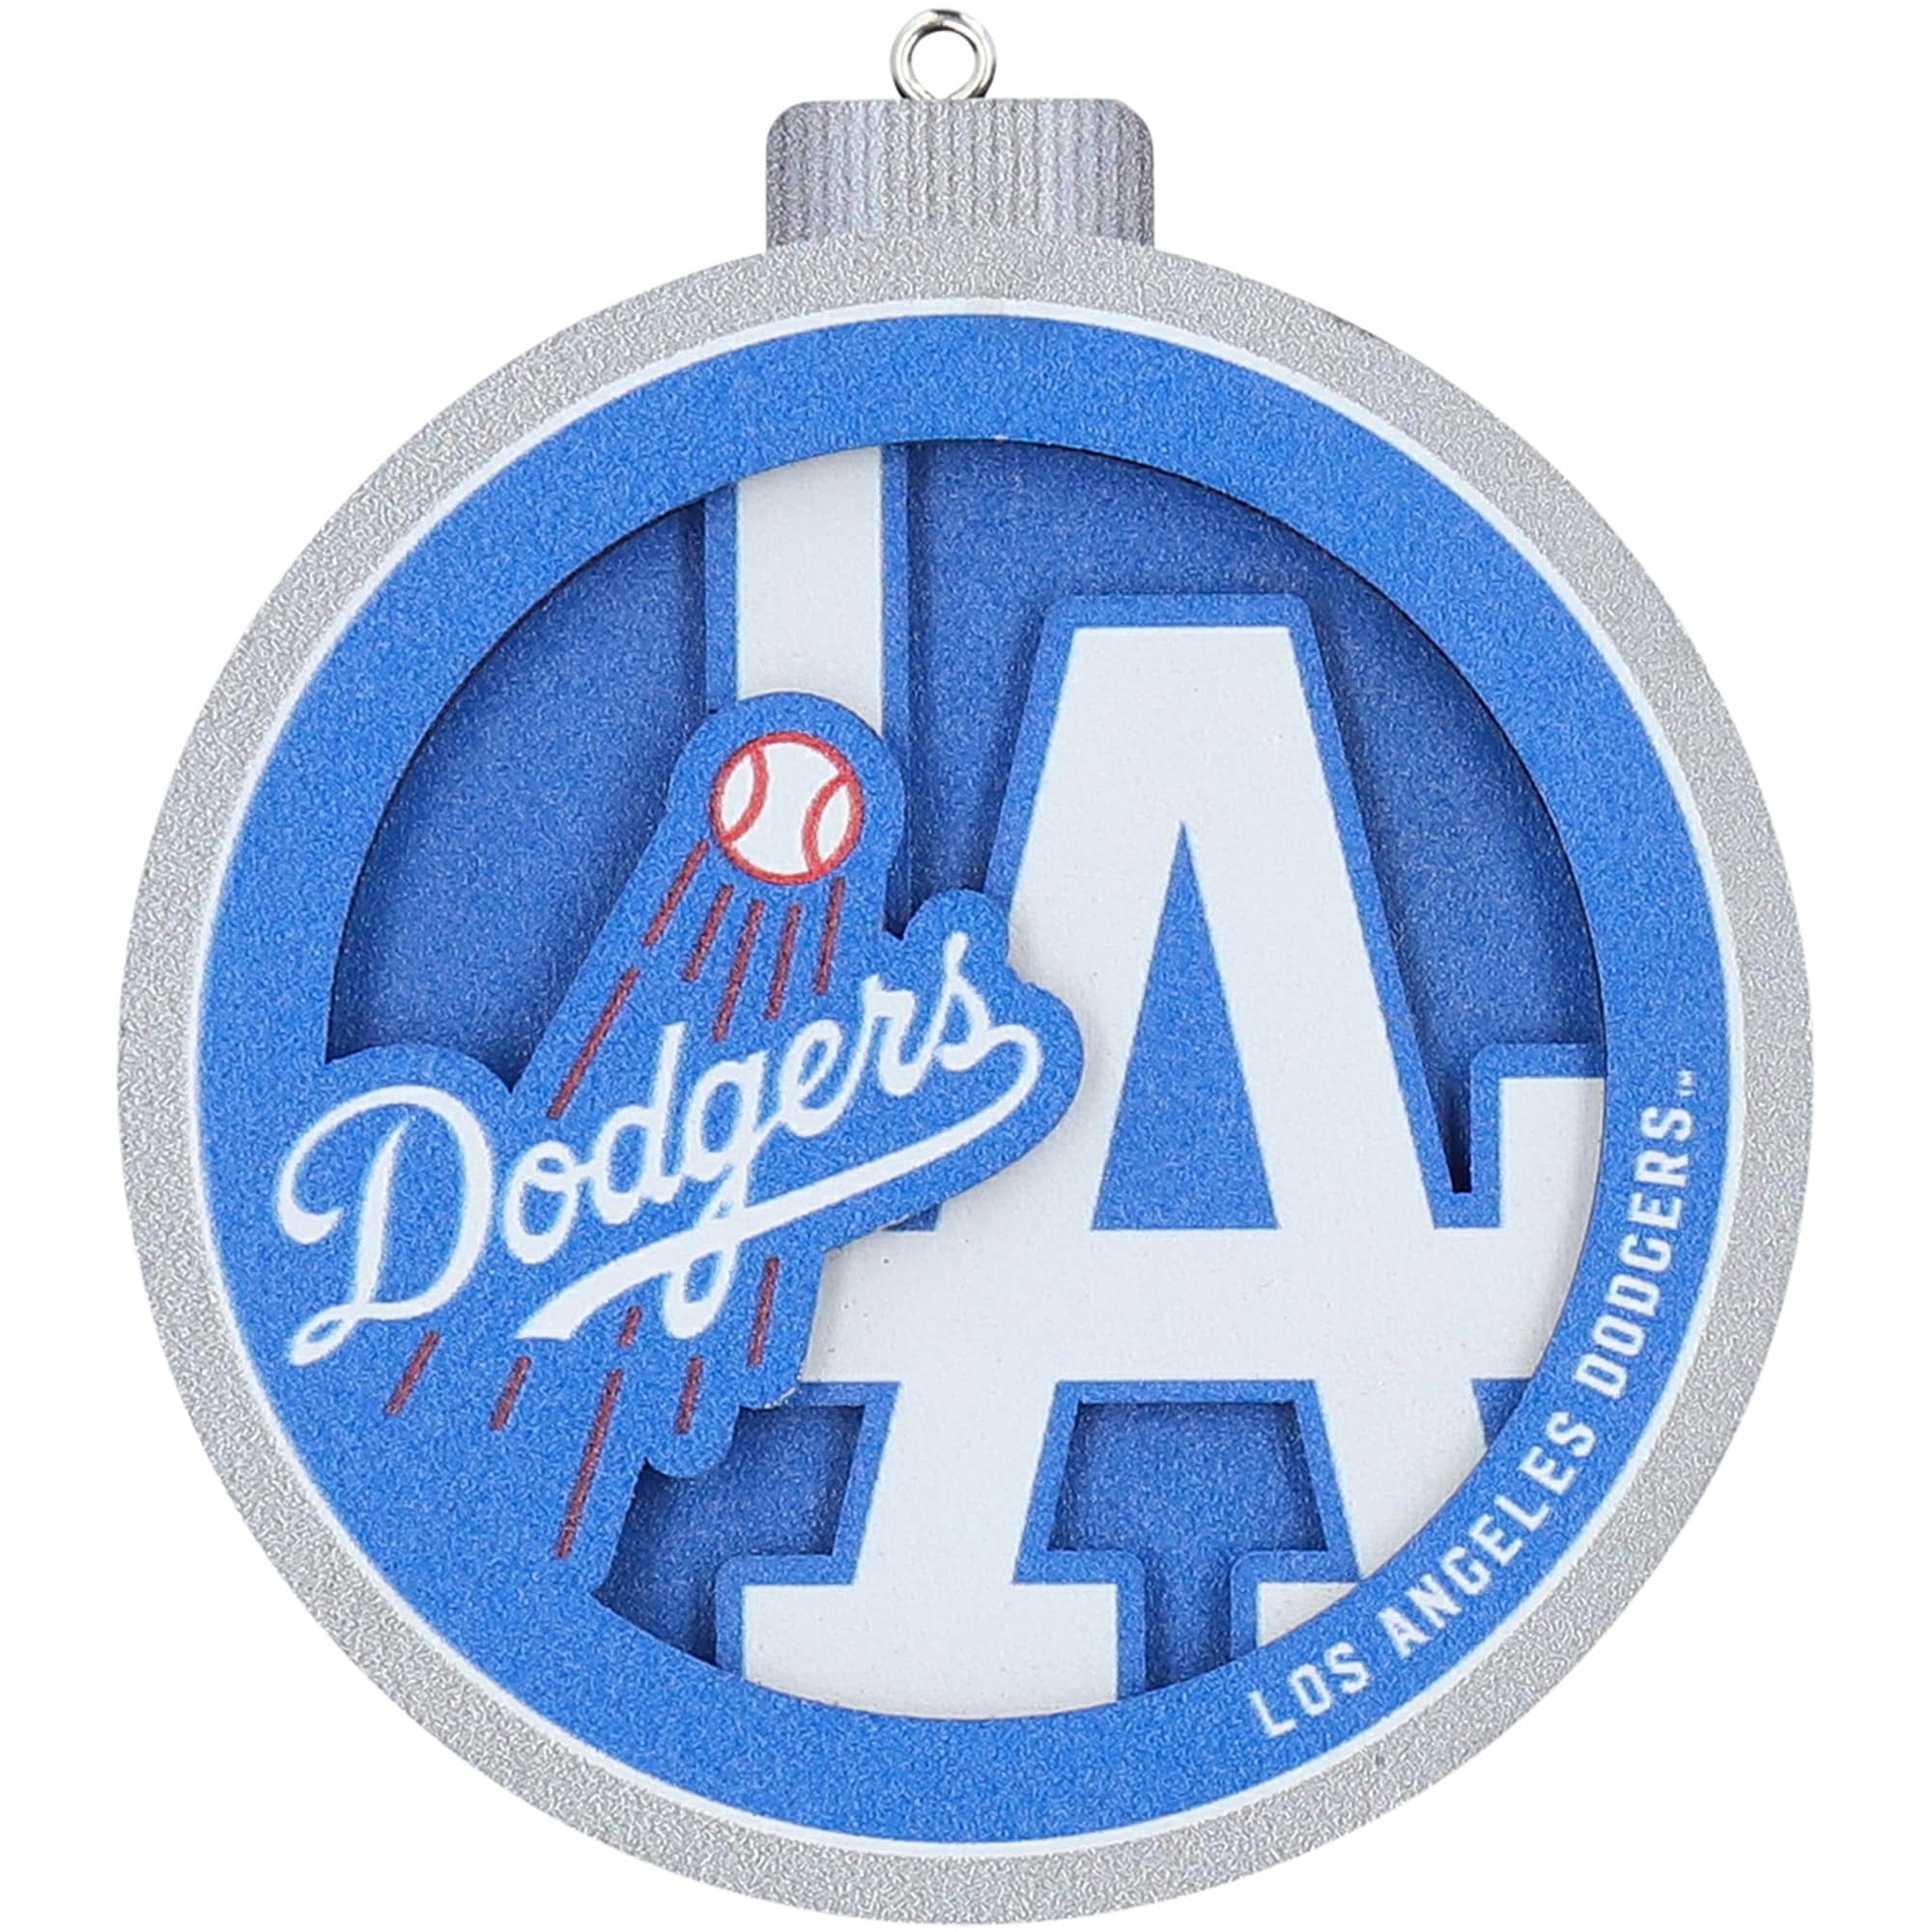 TWO LA DODGERS MEXICAN COLORS EDITION 3D LOGOS, 3D PRINTED, 8 Inch